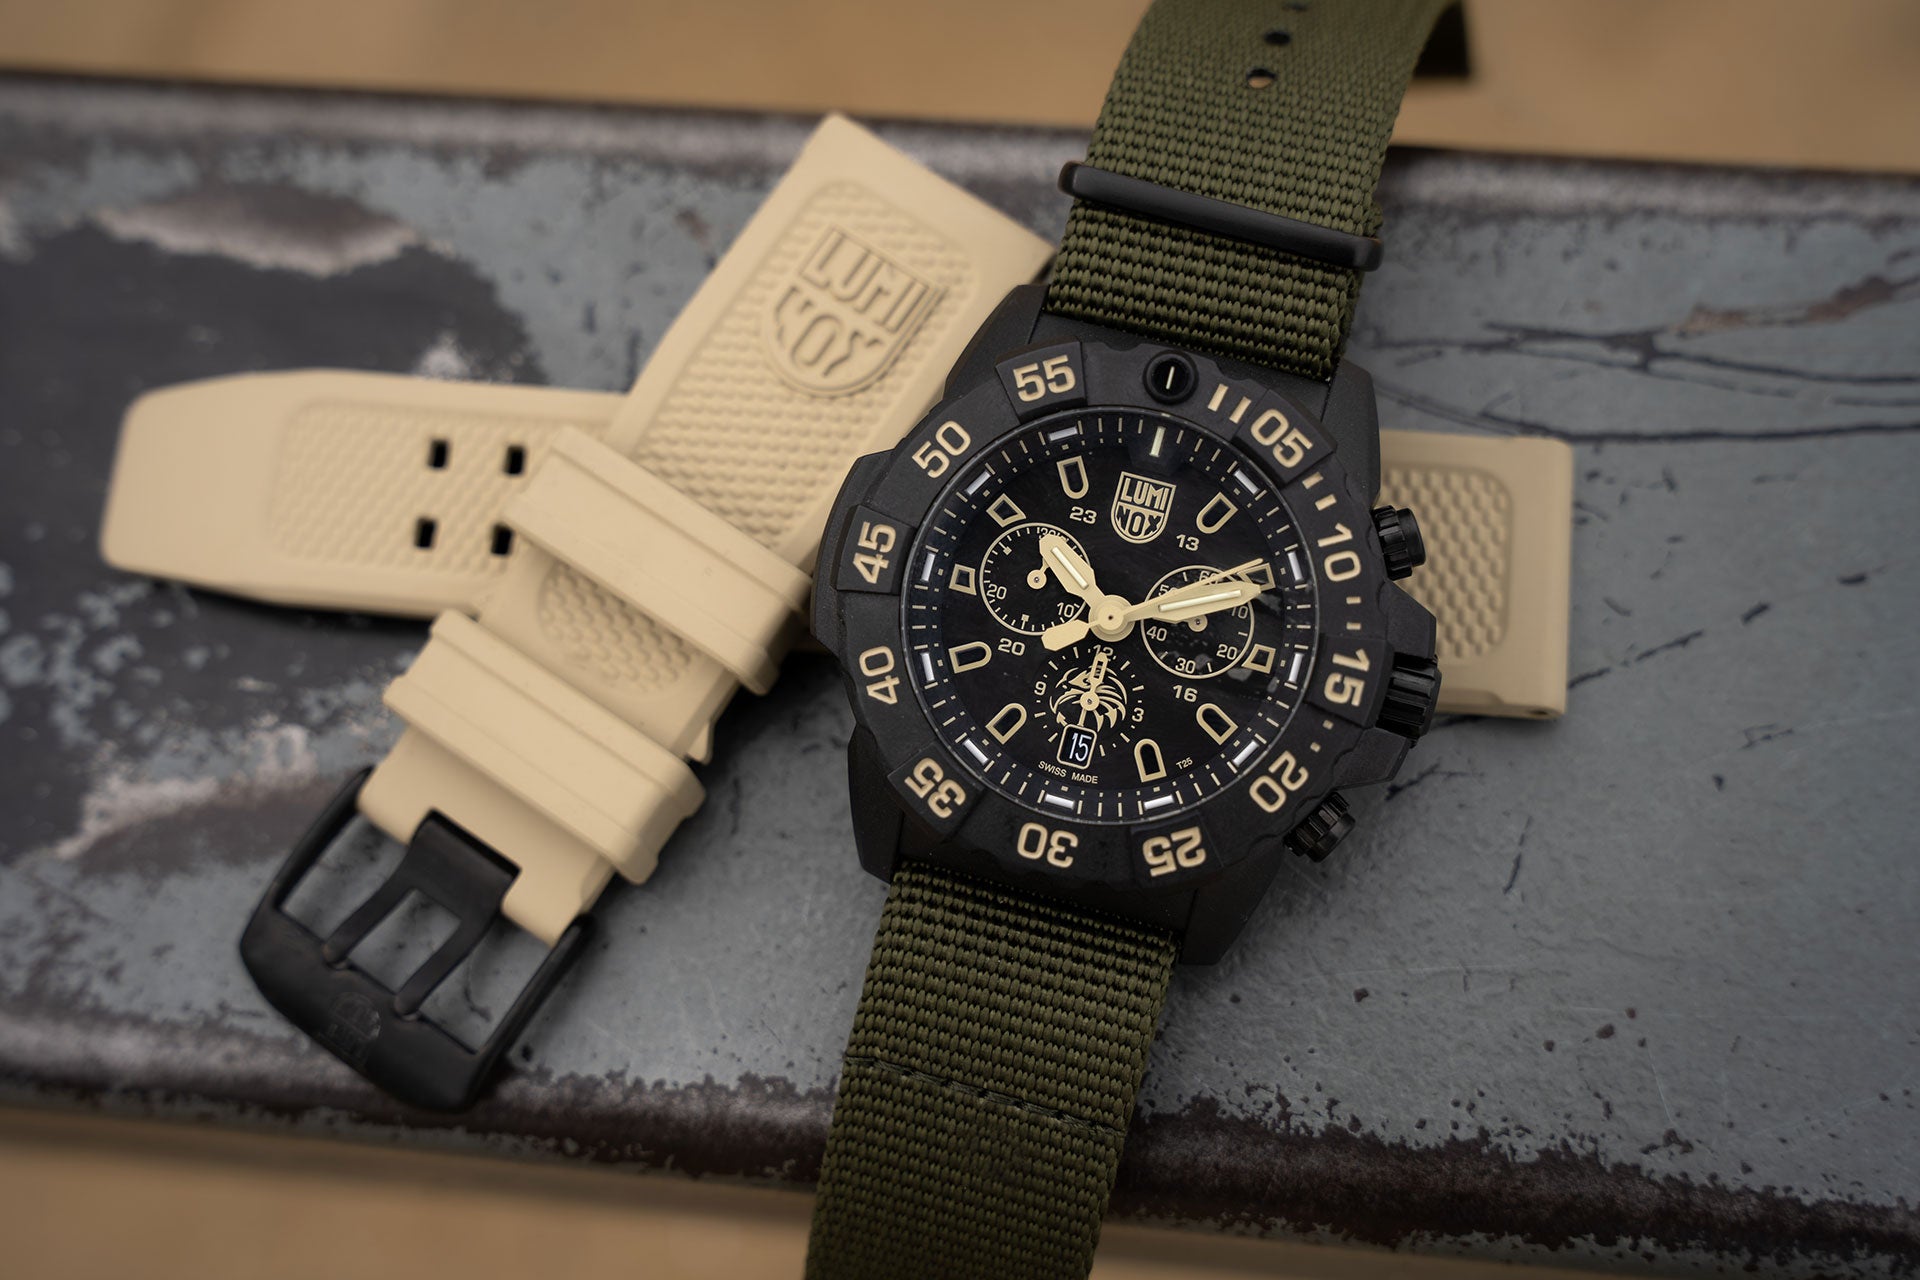 The watch has two interchangeable straps; a sand-coloured rubber strap and an olive webbing strap.